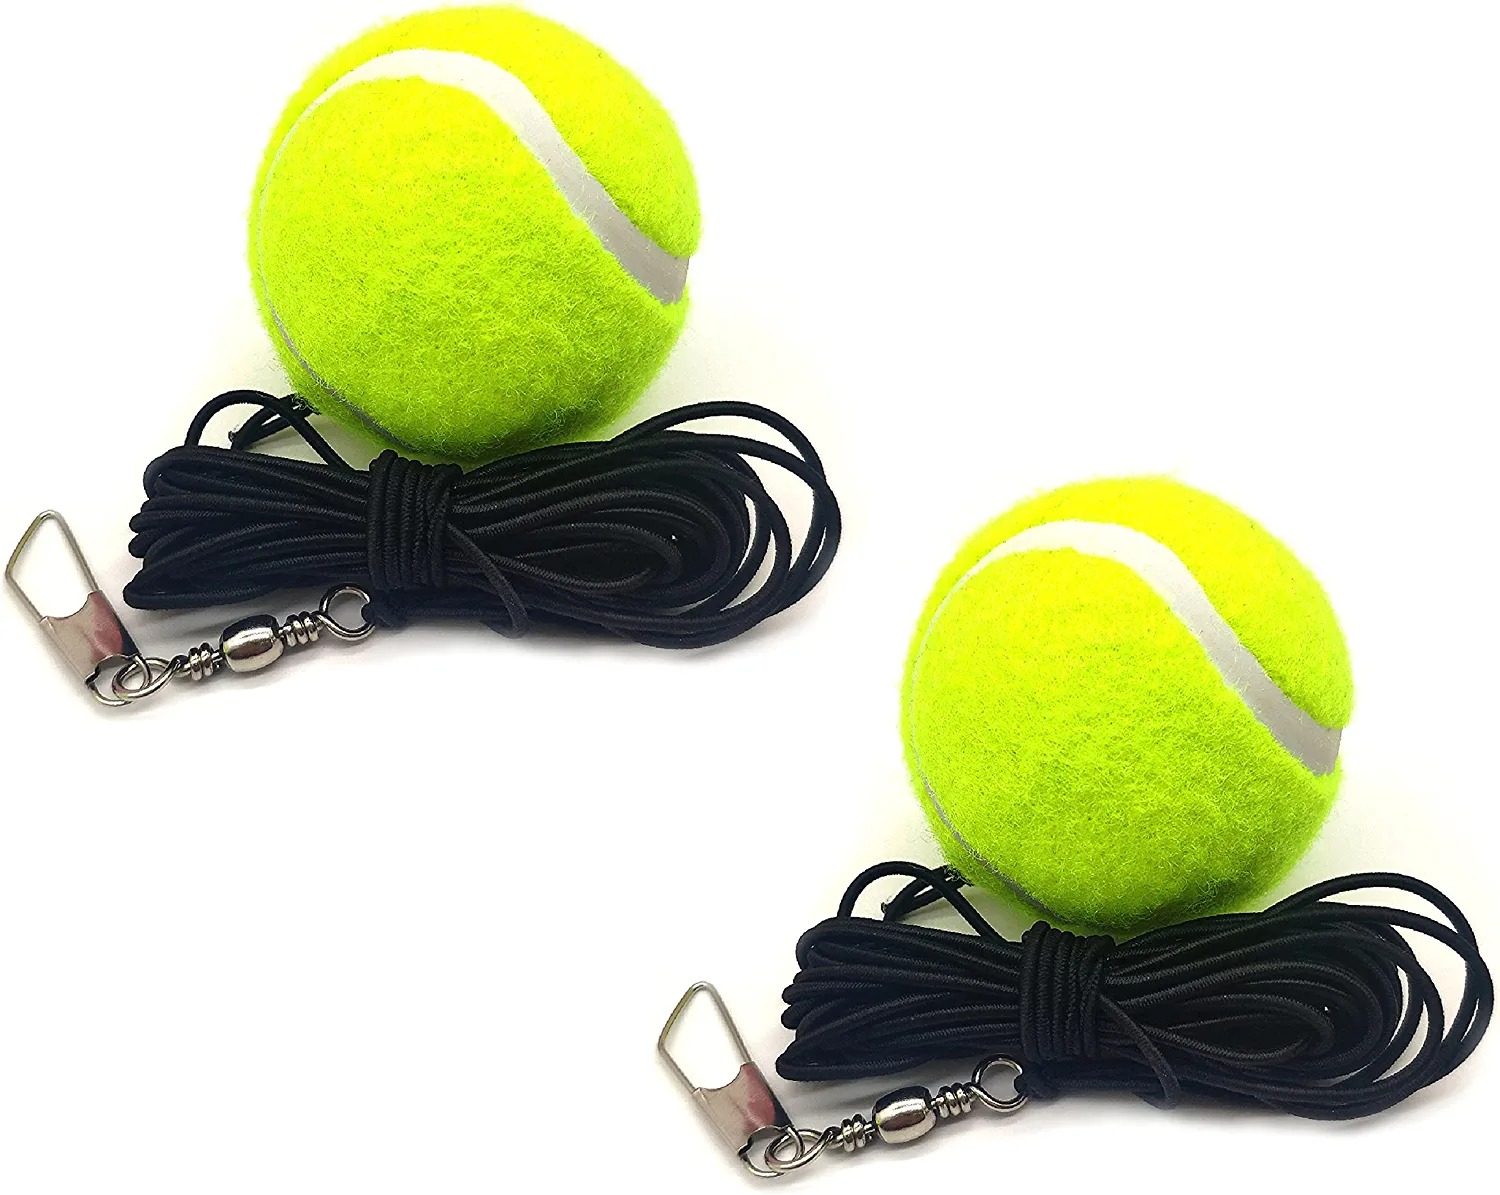 Tennis Practice Device 🎾🎾With 2 Replacement Tennis